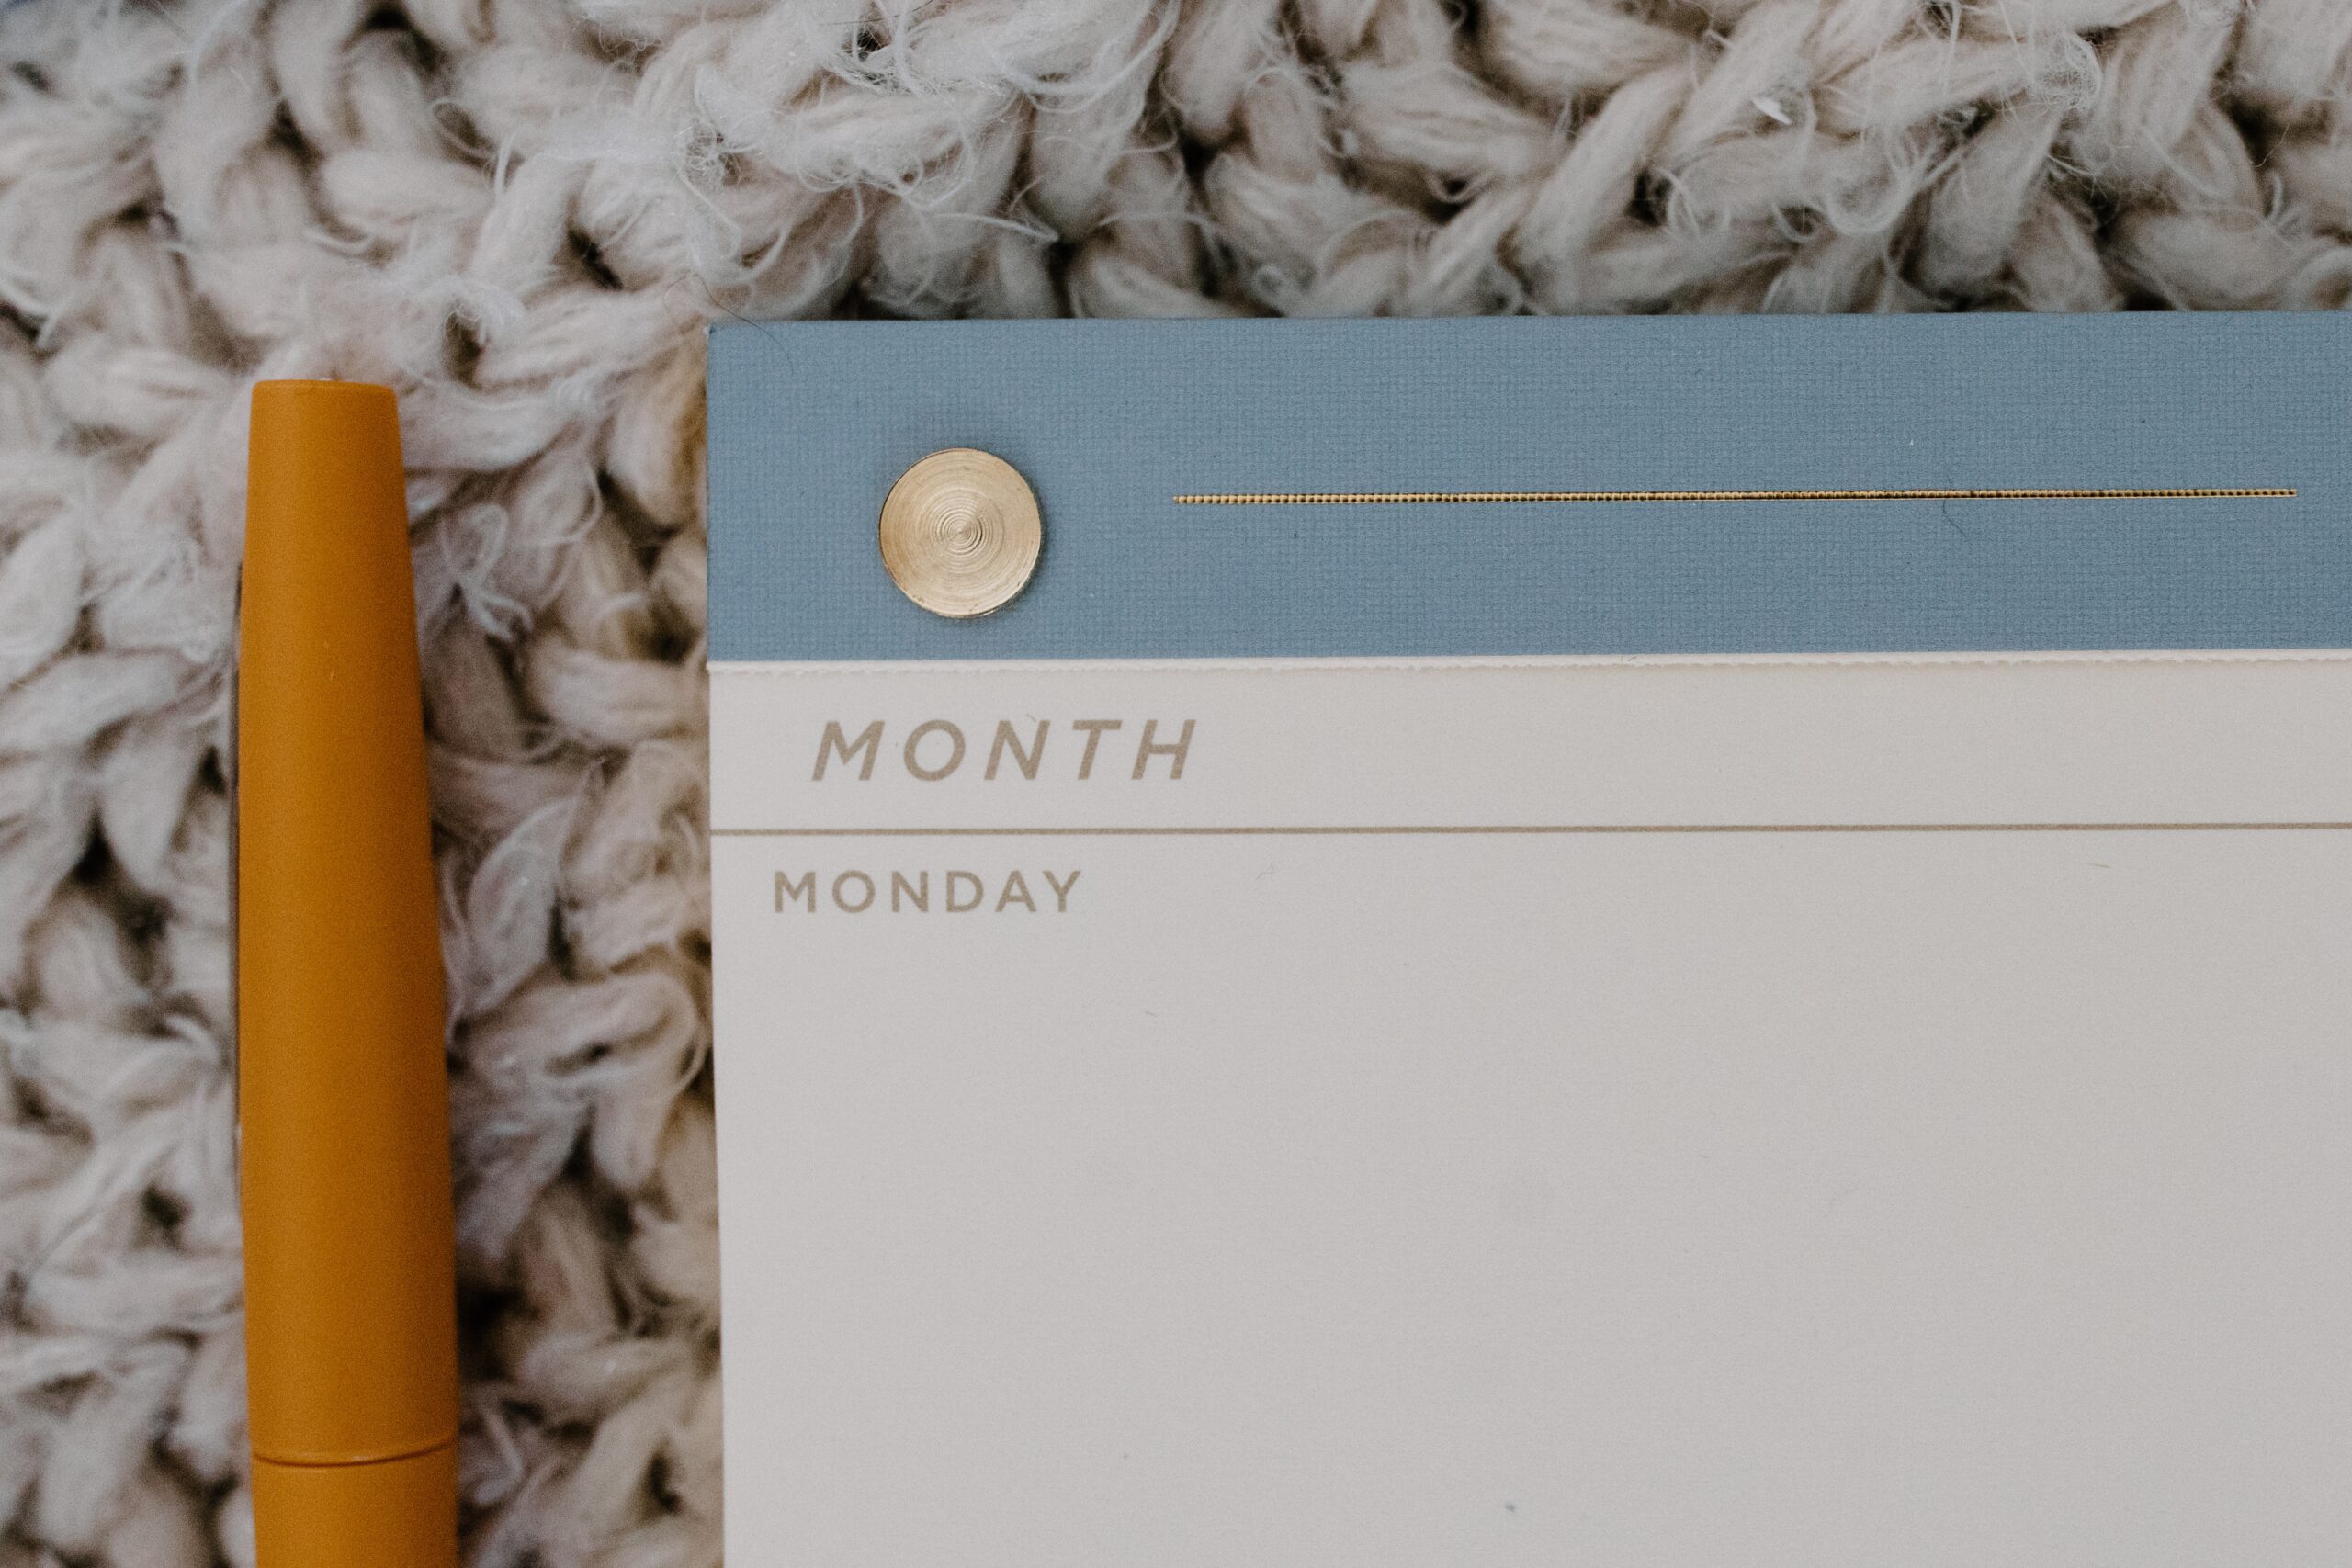 Don’t hate your Mondays: 5 Tips To Turn Your Boring Mondays Around